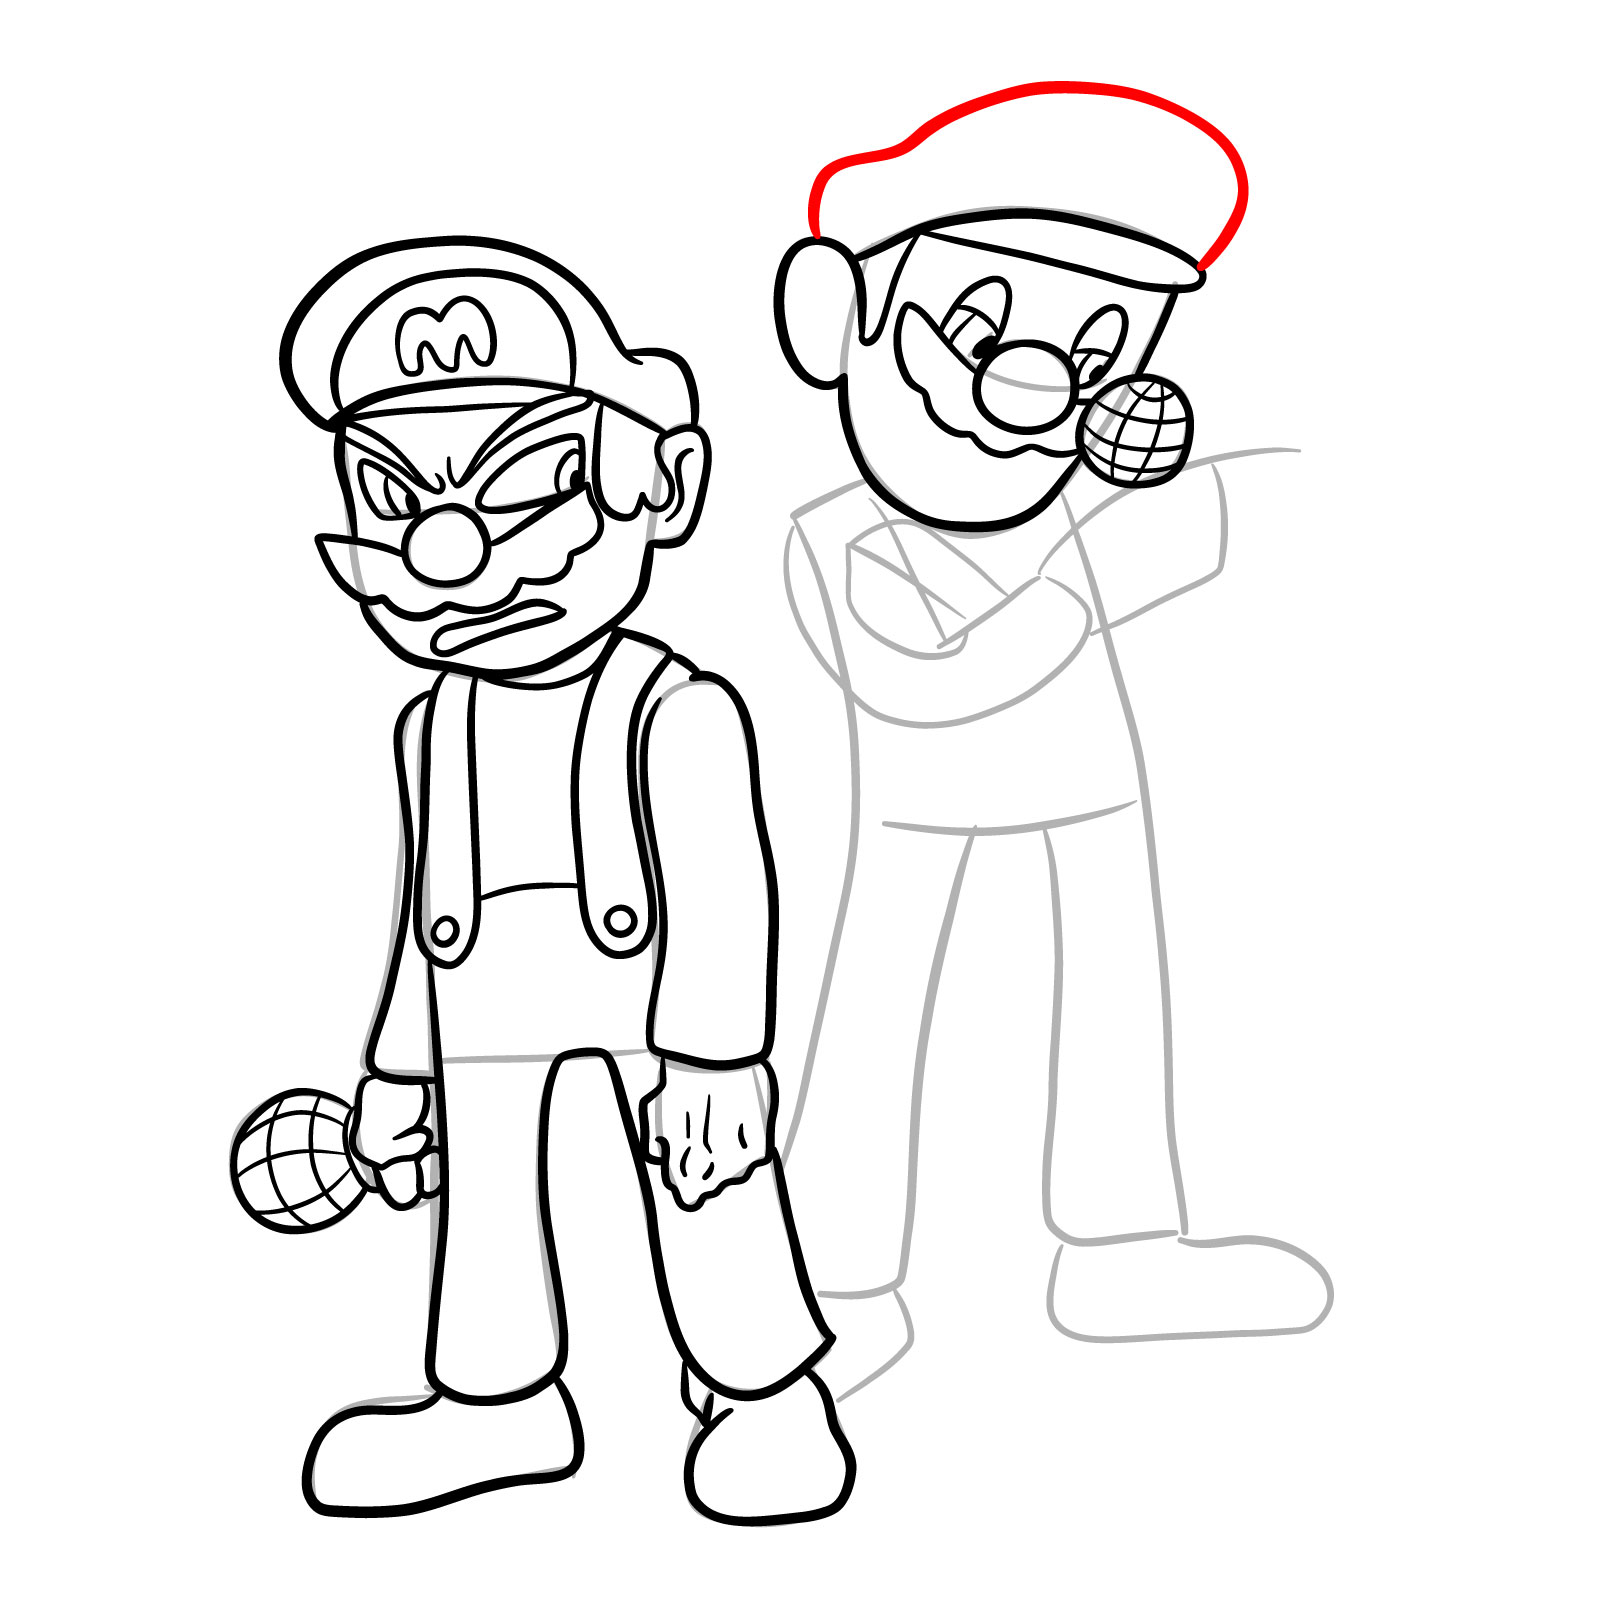 How to draw Mario and Luigi from Tails Gets Trolled - step 31